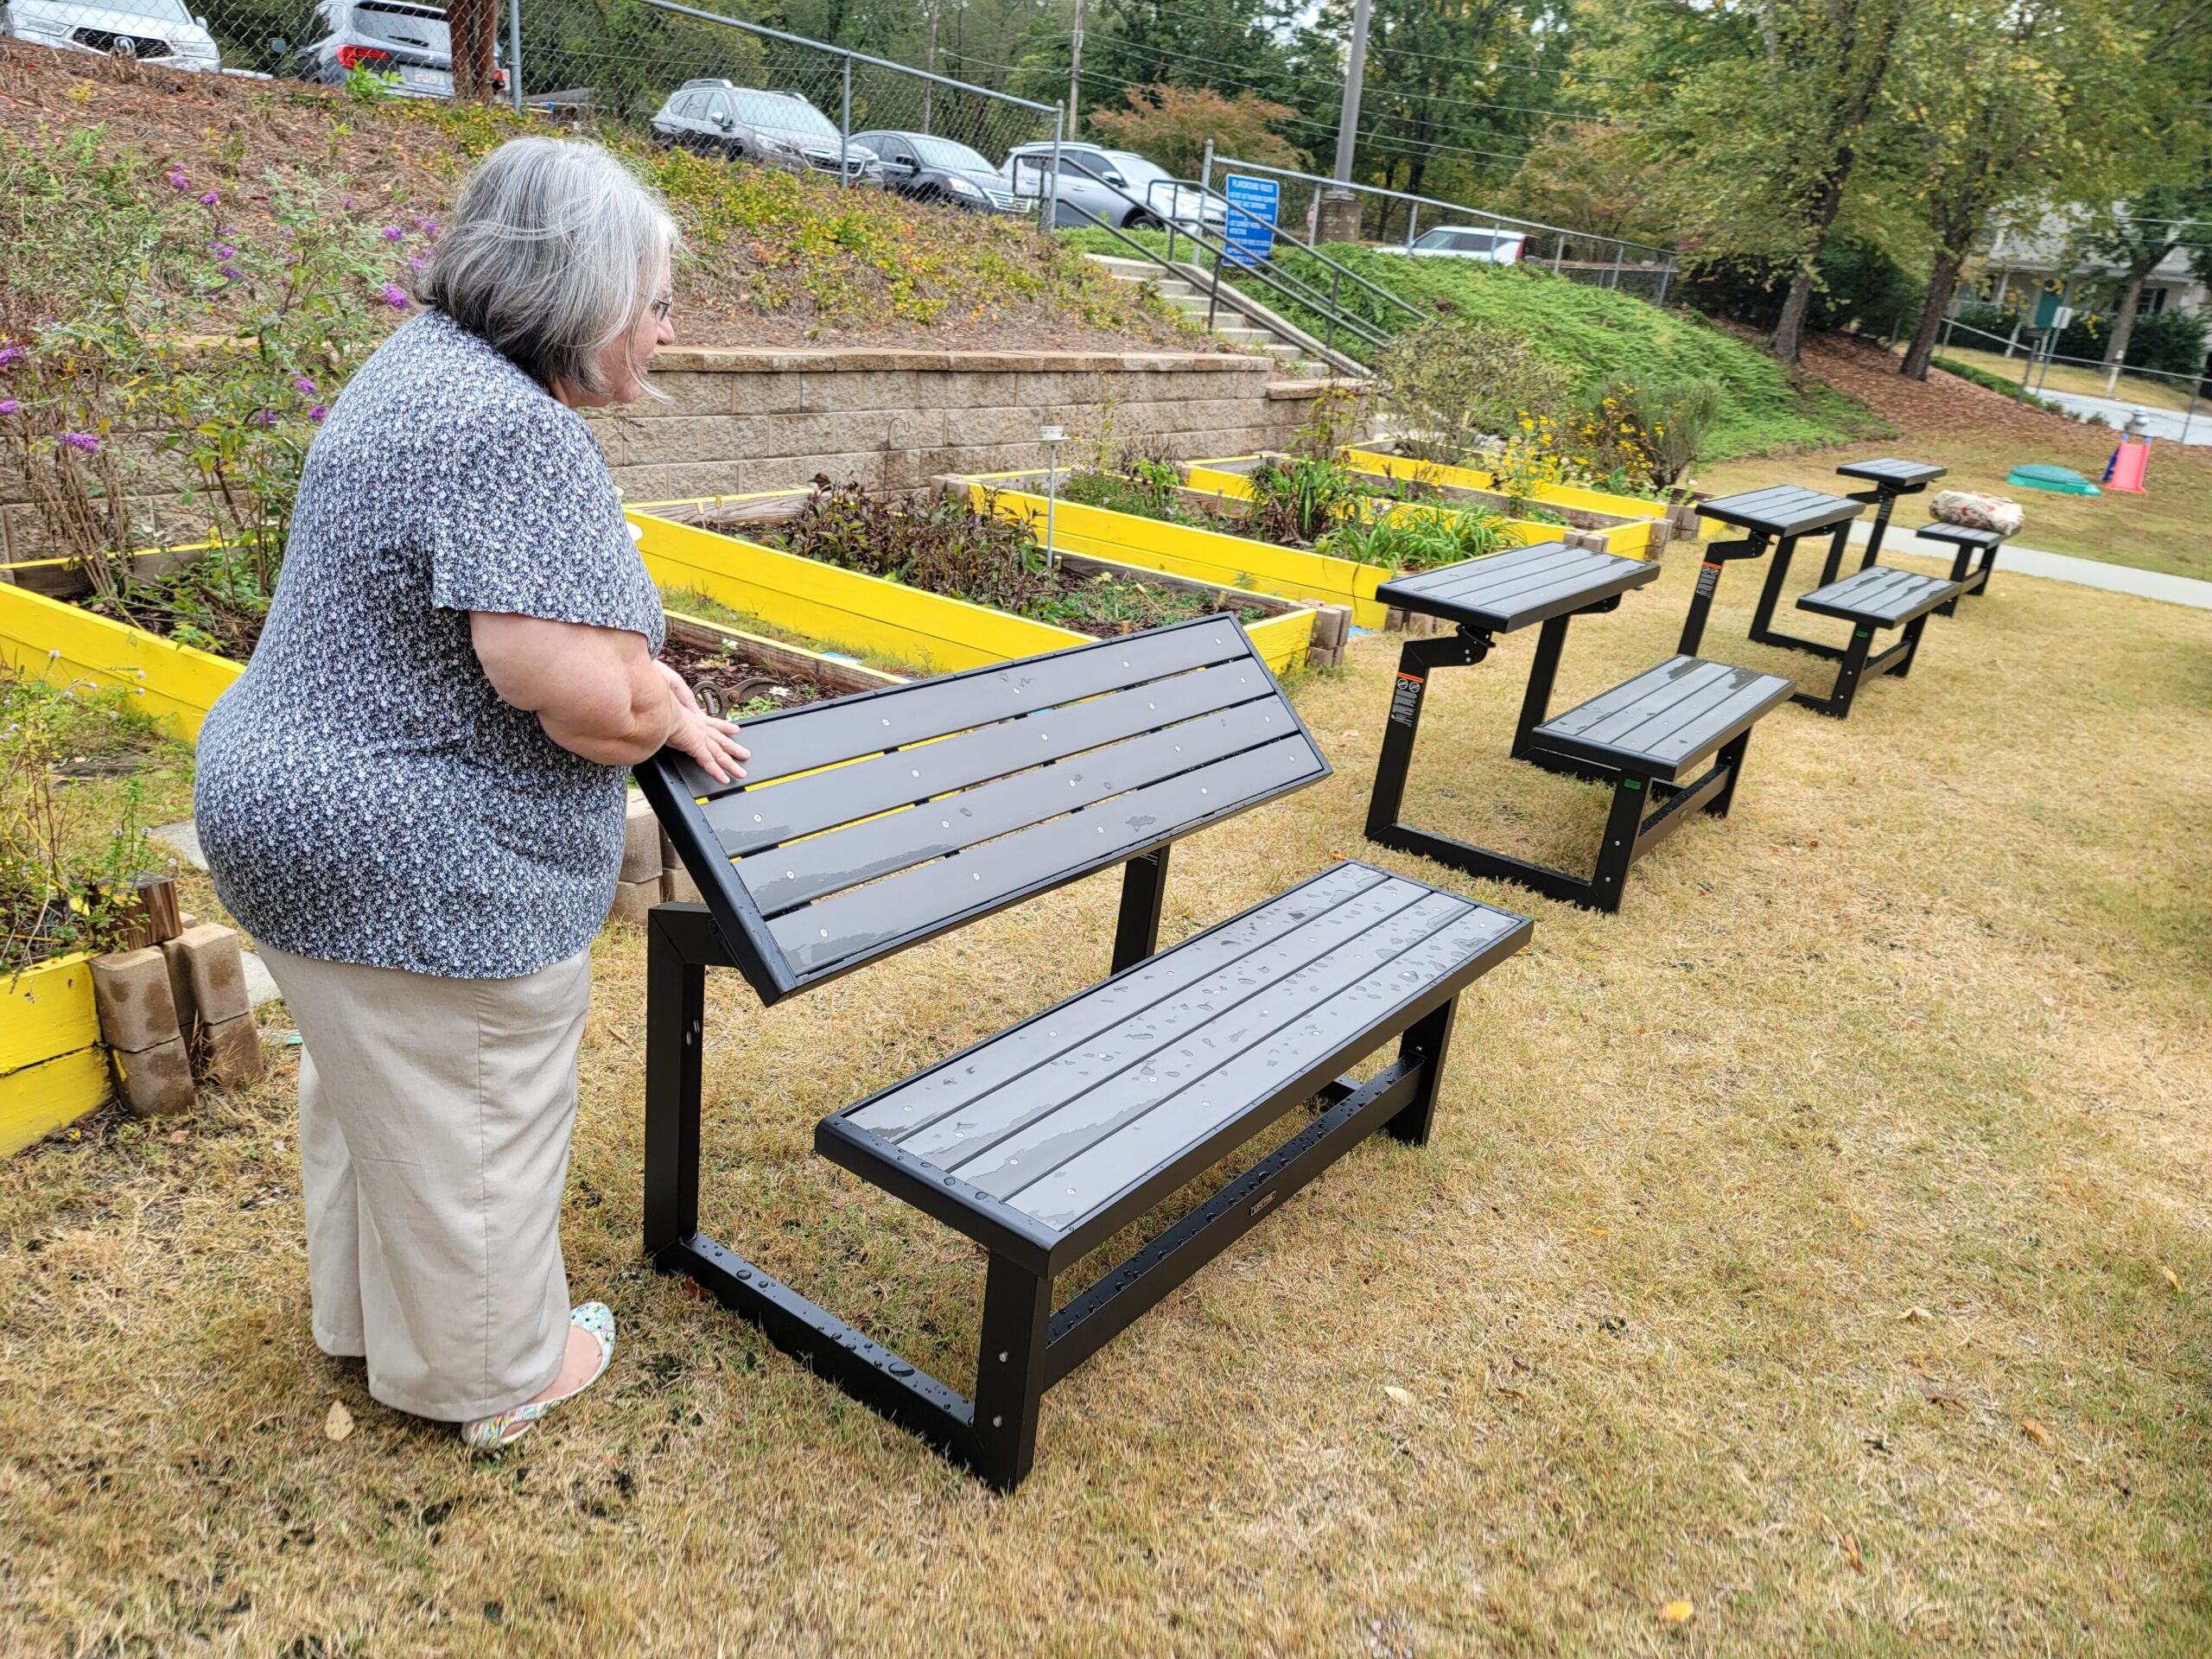 A woman in gray and tan clothes adjusts a gray bench that converts to a outdoor desk, with yellow raised garden beds in the background.